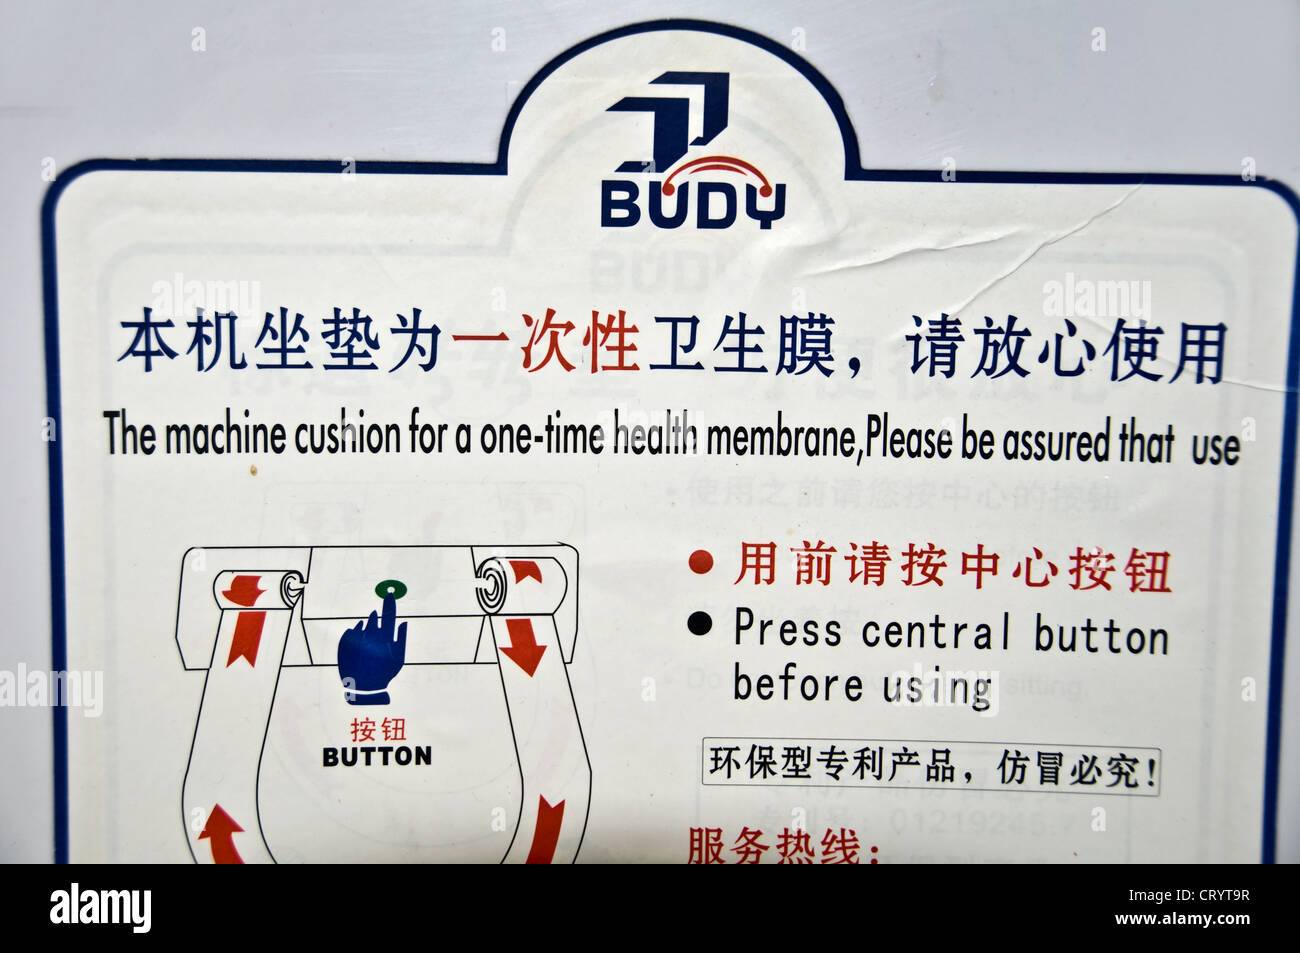 Toilet label written in a chinglish (ungrammatical or nonsensical English translanted from Chinese) - Shanghai Stock Photo